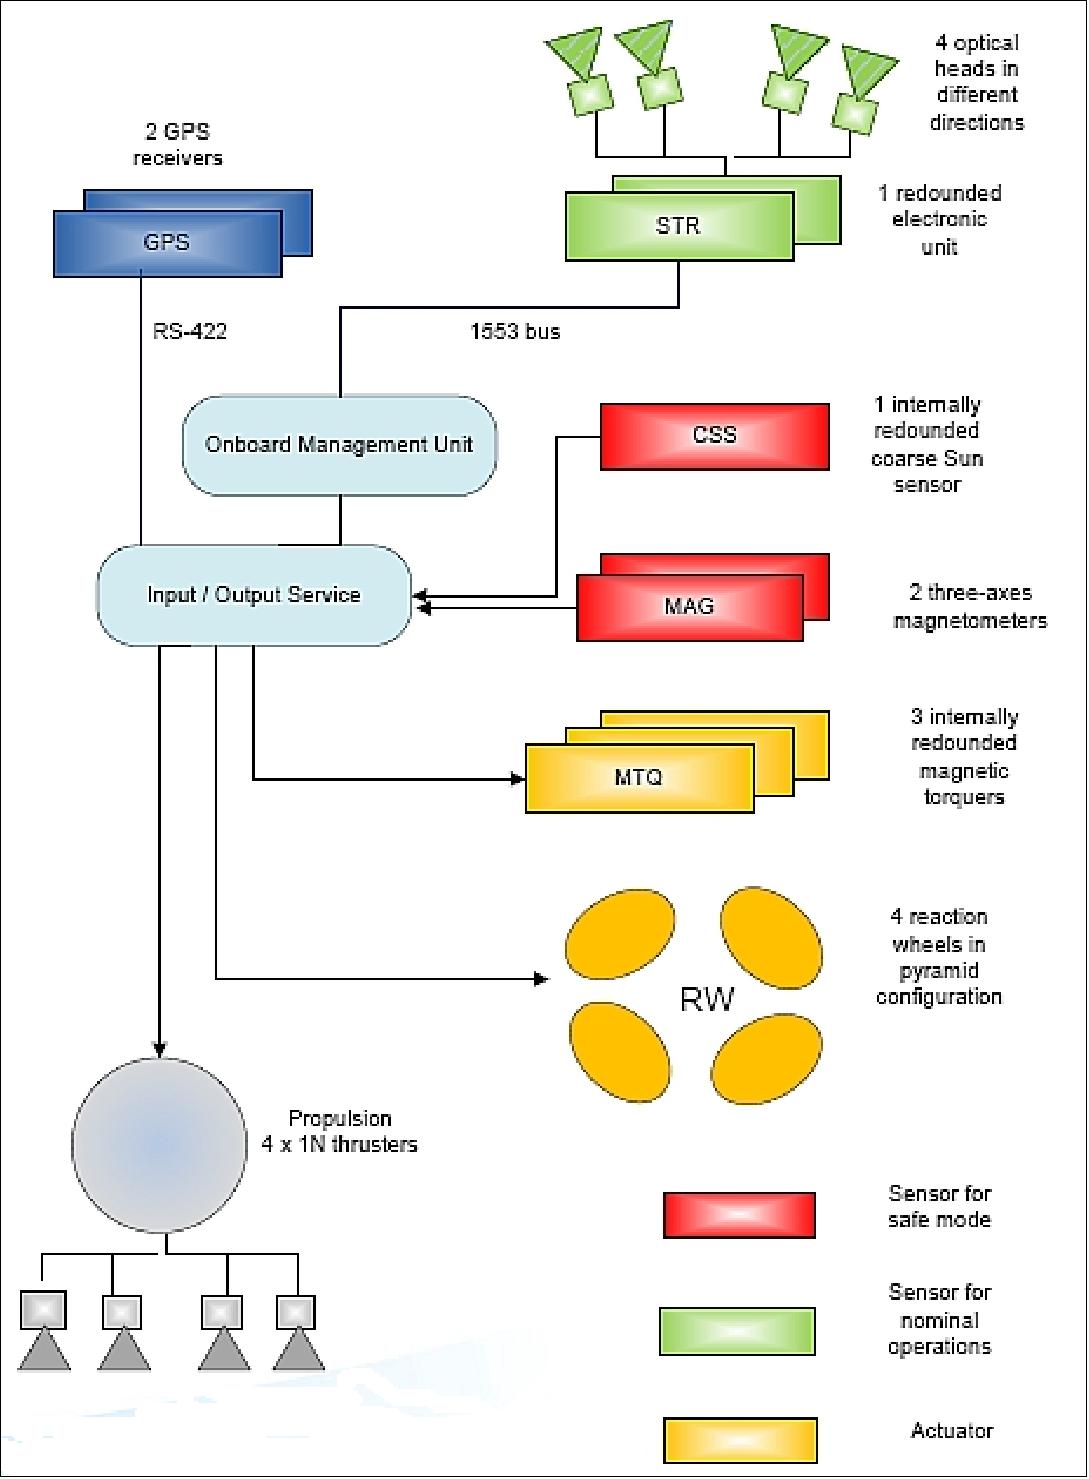 Figure 4: Schematic view of AOCS and propulsion subsystem elements (image credit: EADS CASA Espacio)